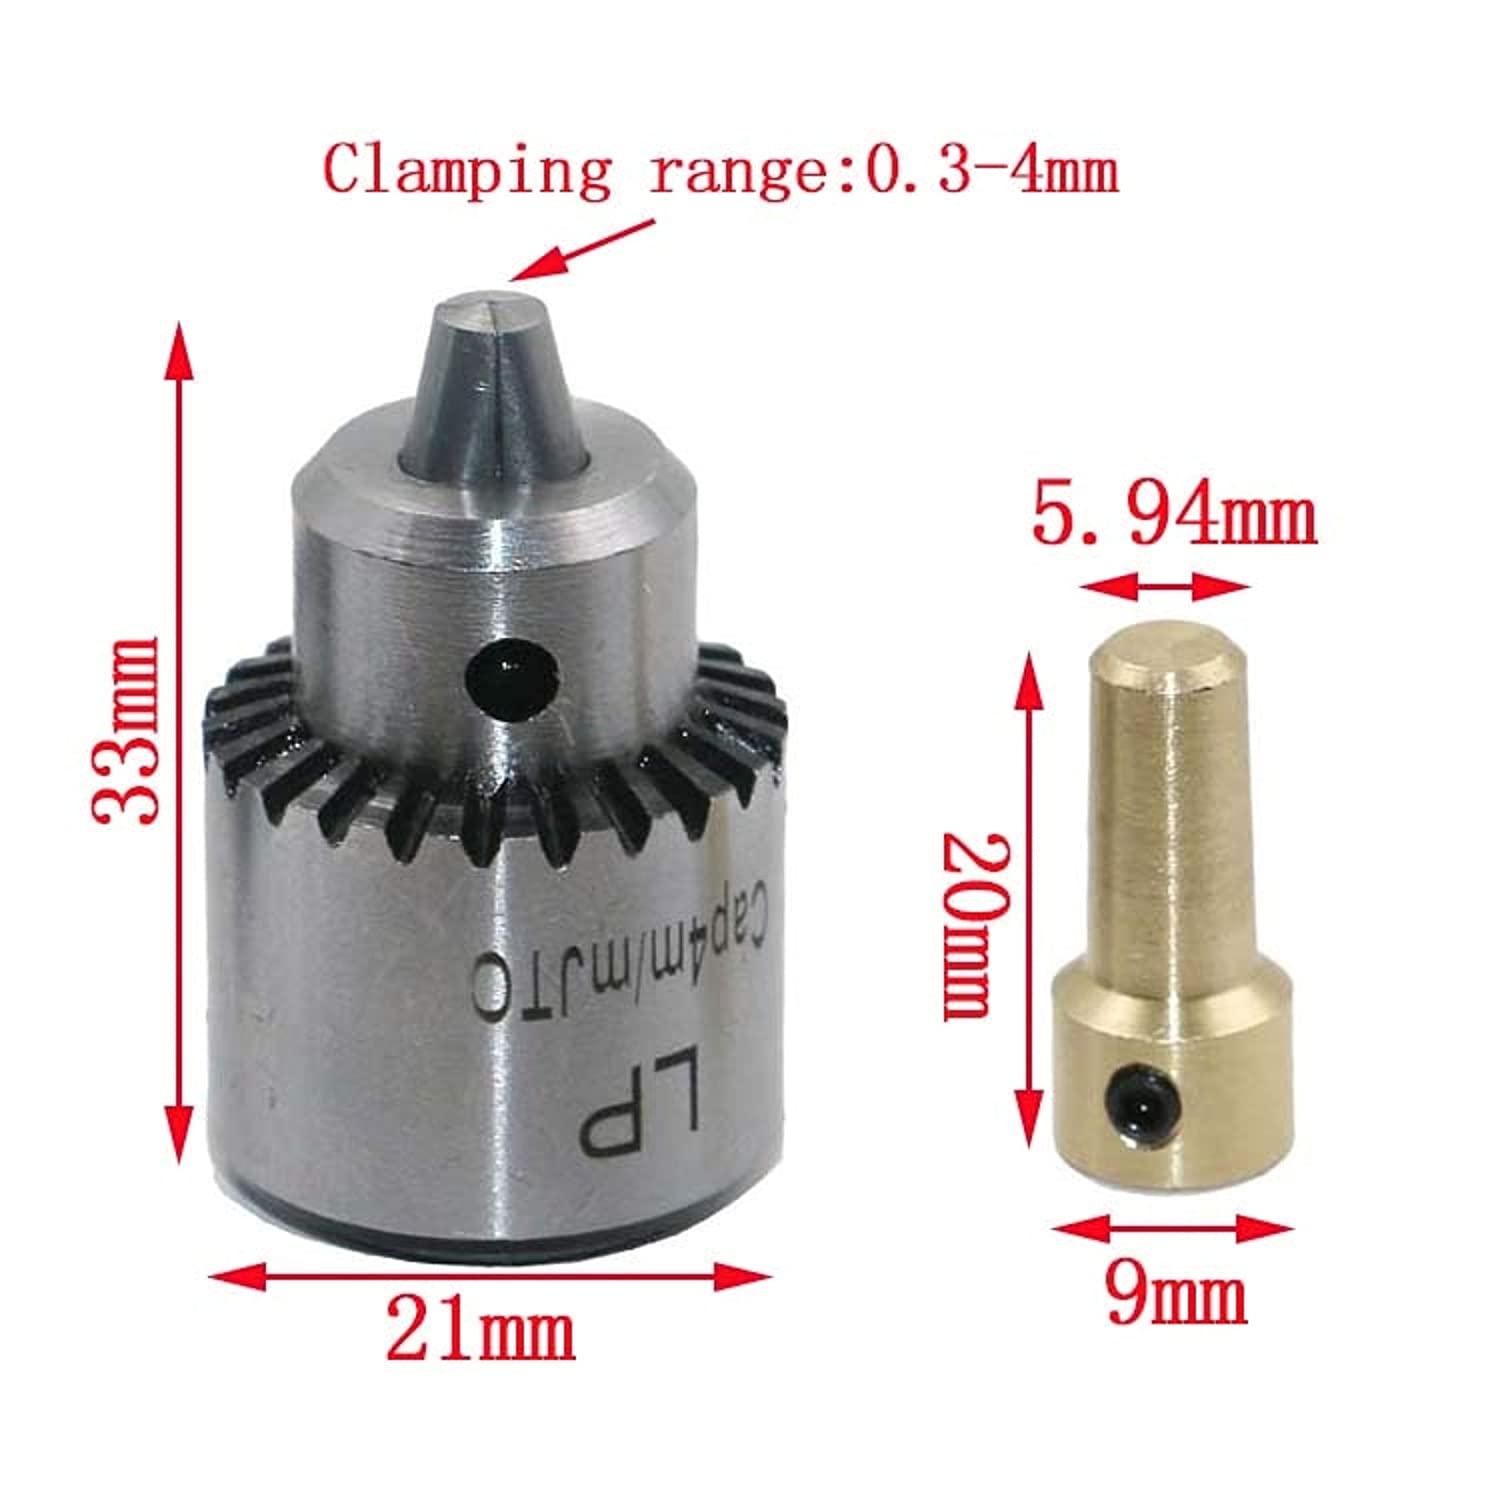 Motor Drill Chucks Clamping for 0.3-4 mm Bits (Set of 4)